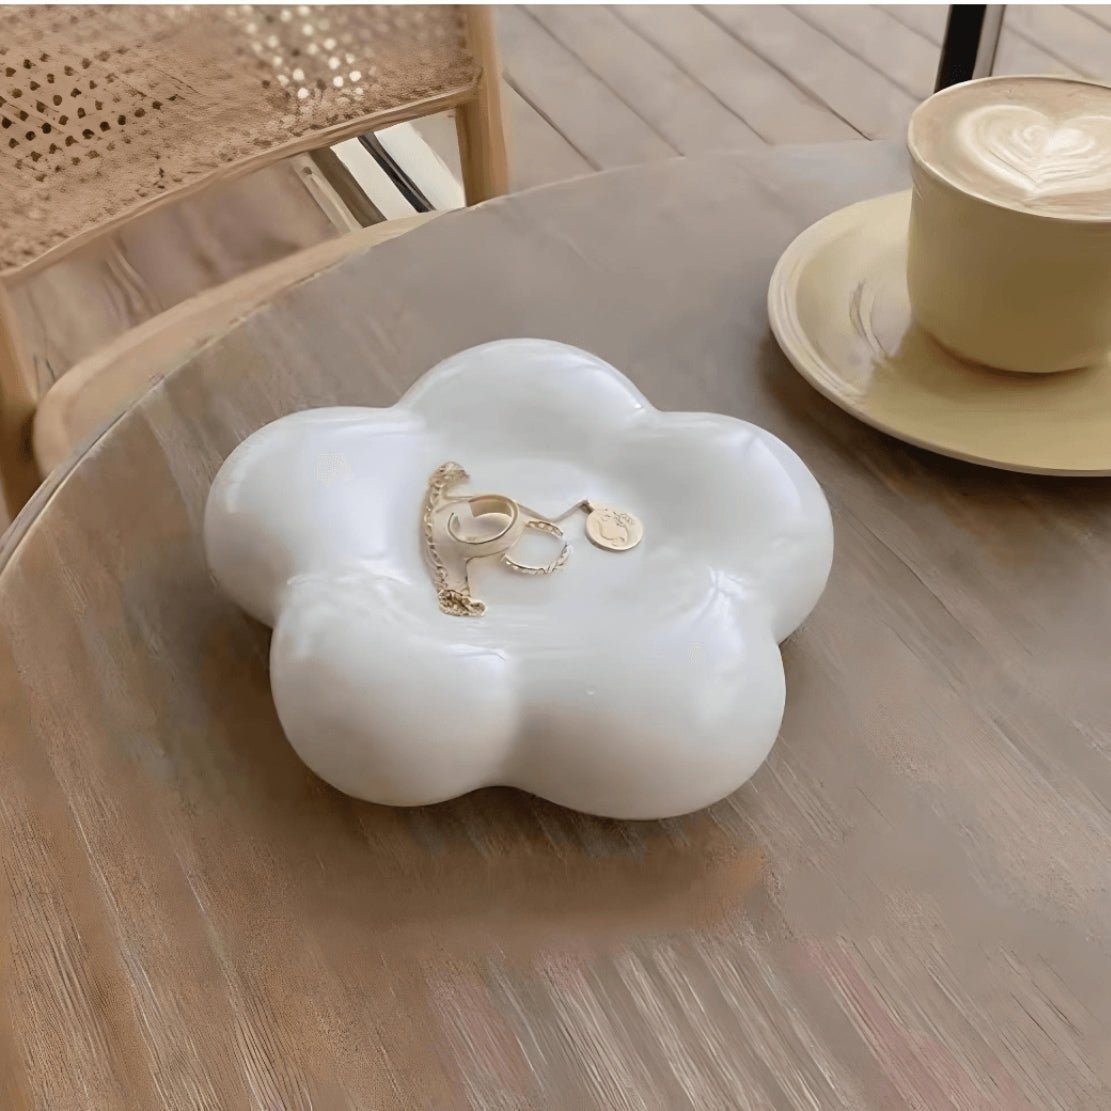 White puffy flower plate